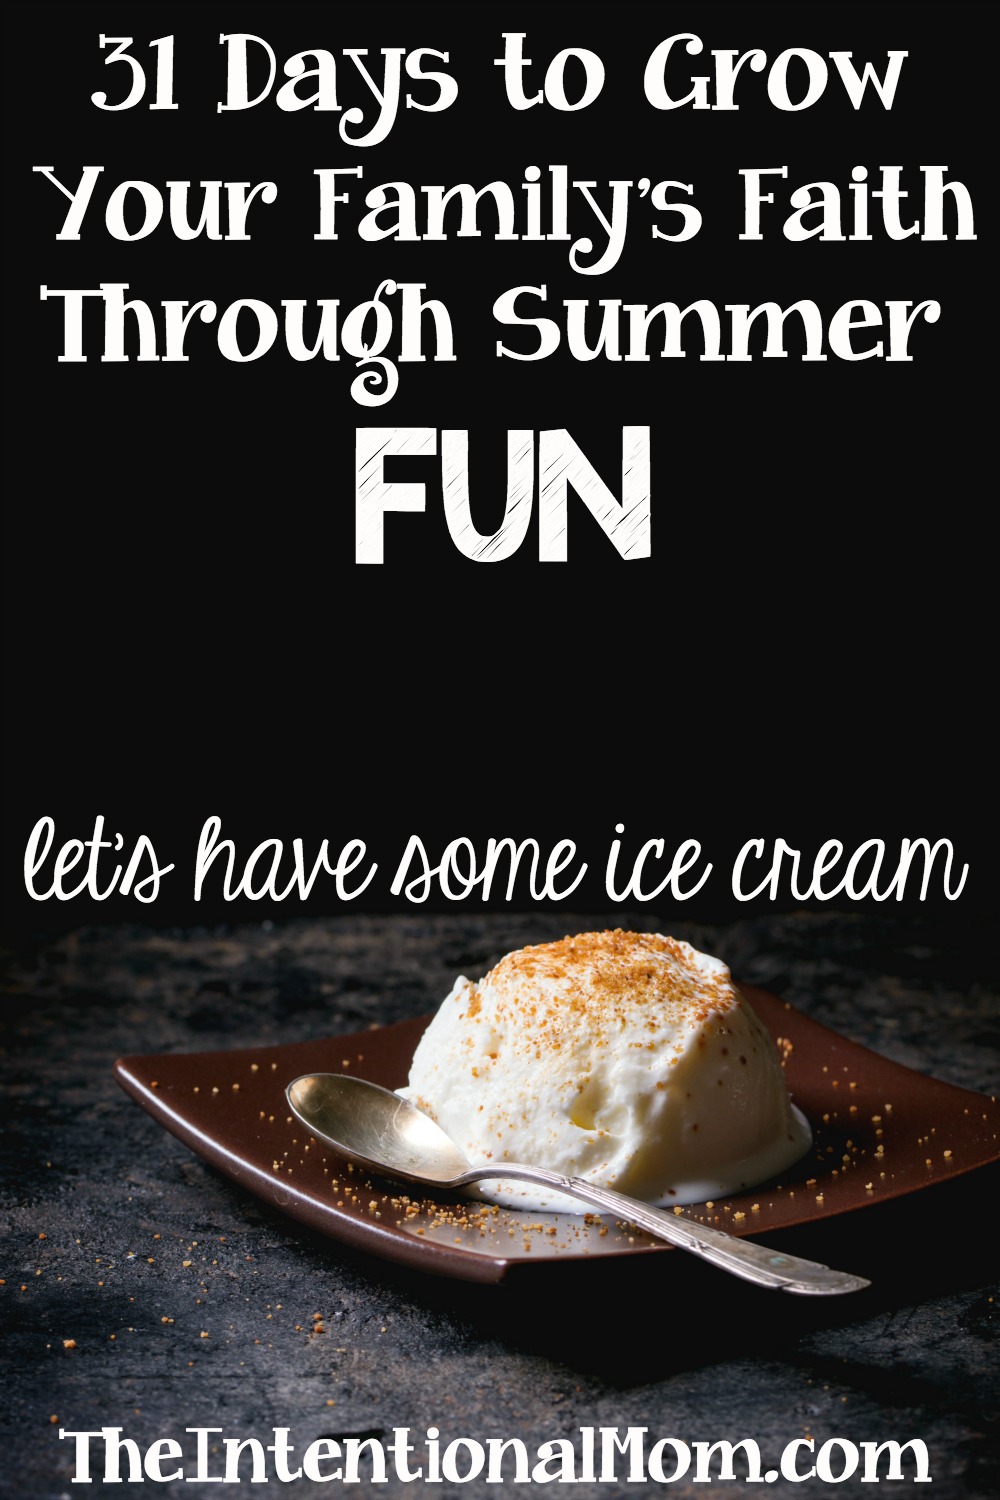 31 Ways to Grow Your Family’s Faith Through Summer Fun – Let’s Have Some Ice Cream